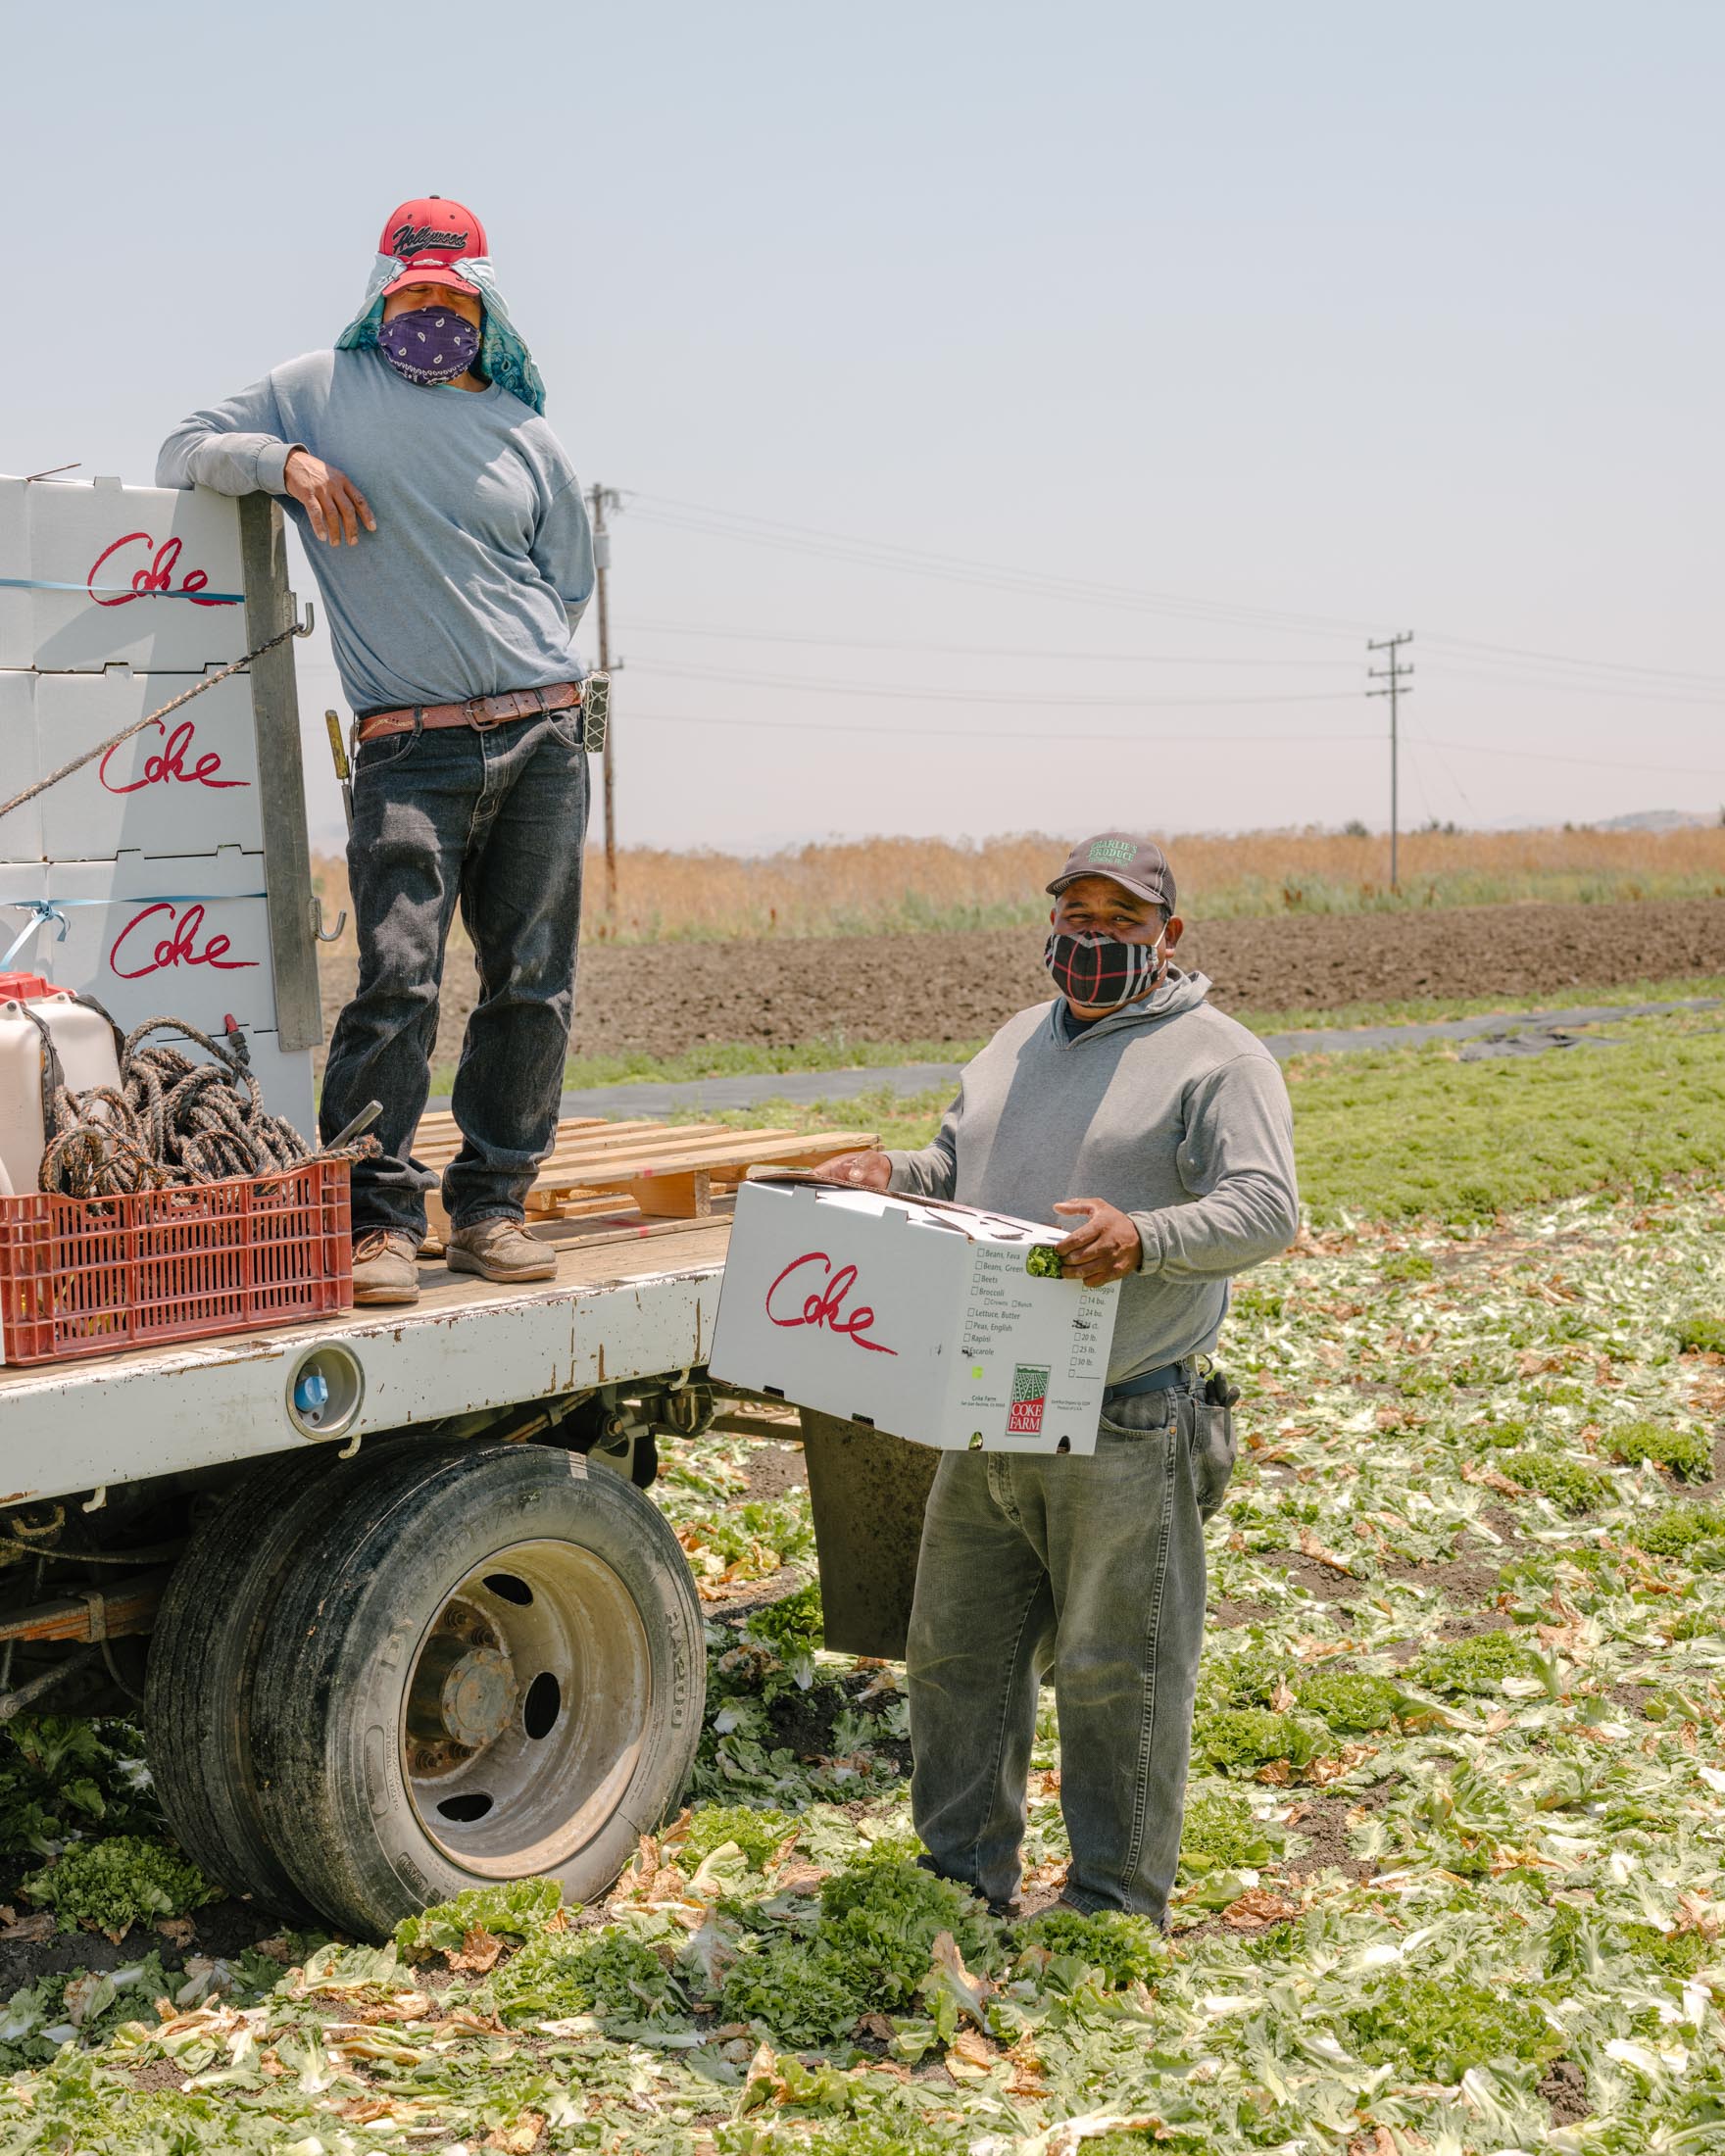 Workers pack a truckload of freshly harvested escarole at&nbsp;Coke Farm&nbsp;in San Juan Bautista, California&nbsp;on July 16, 2020.